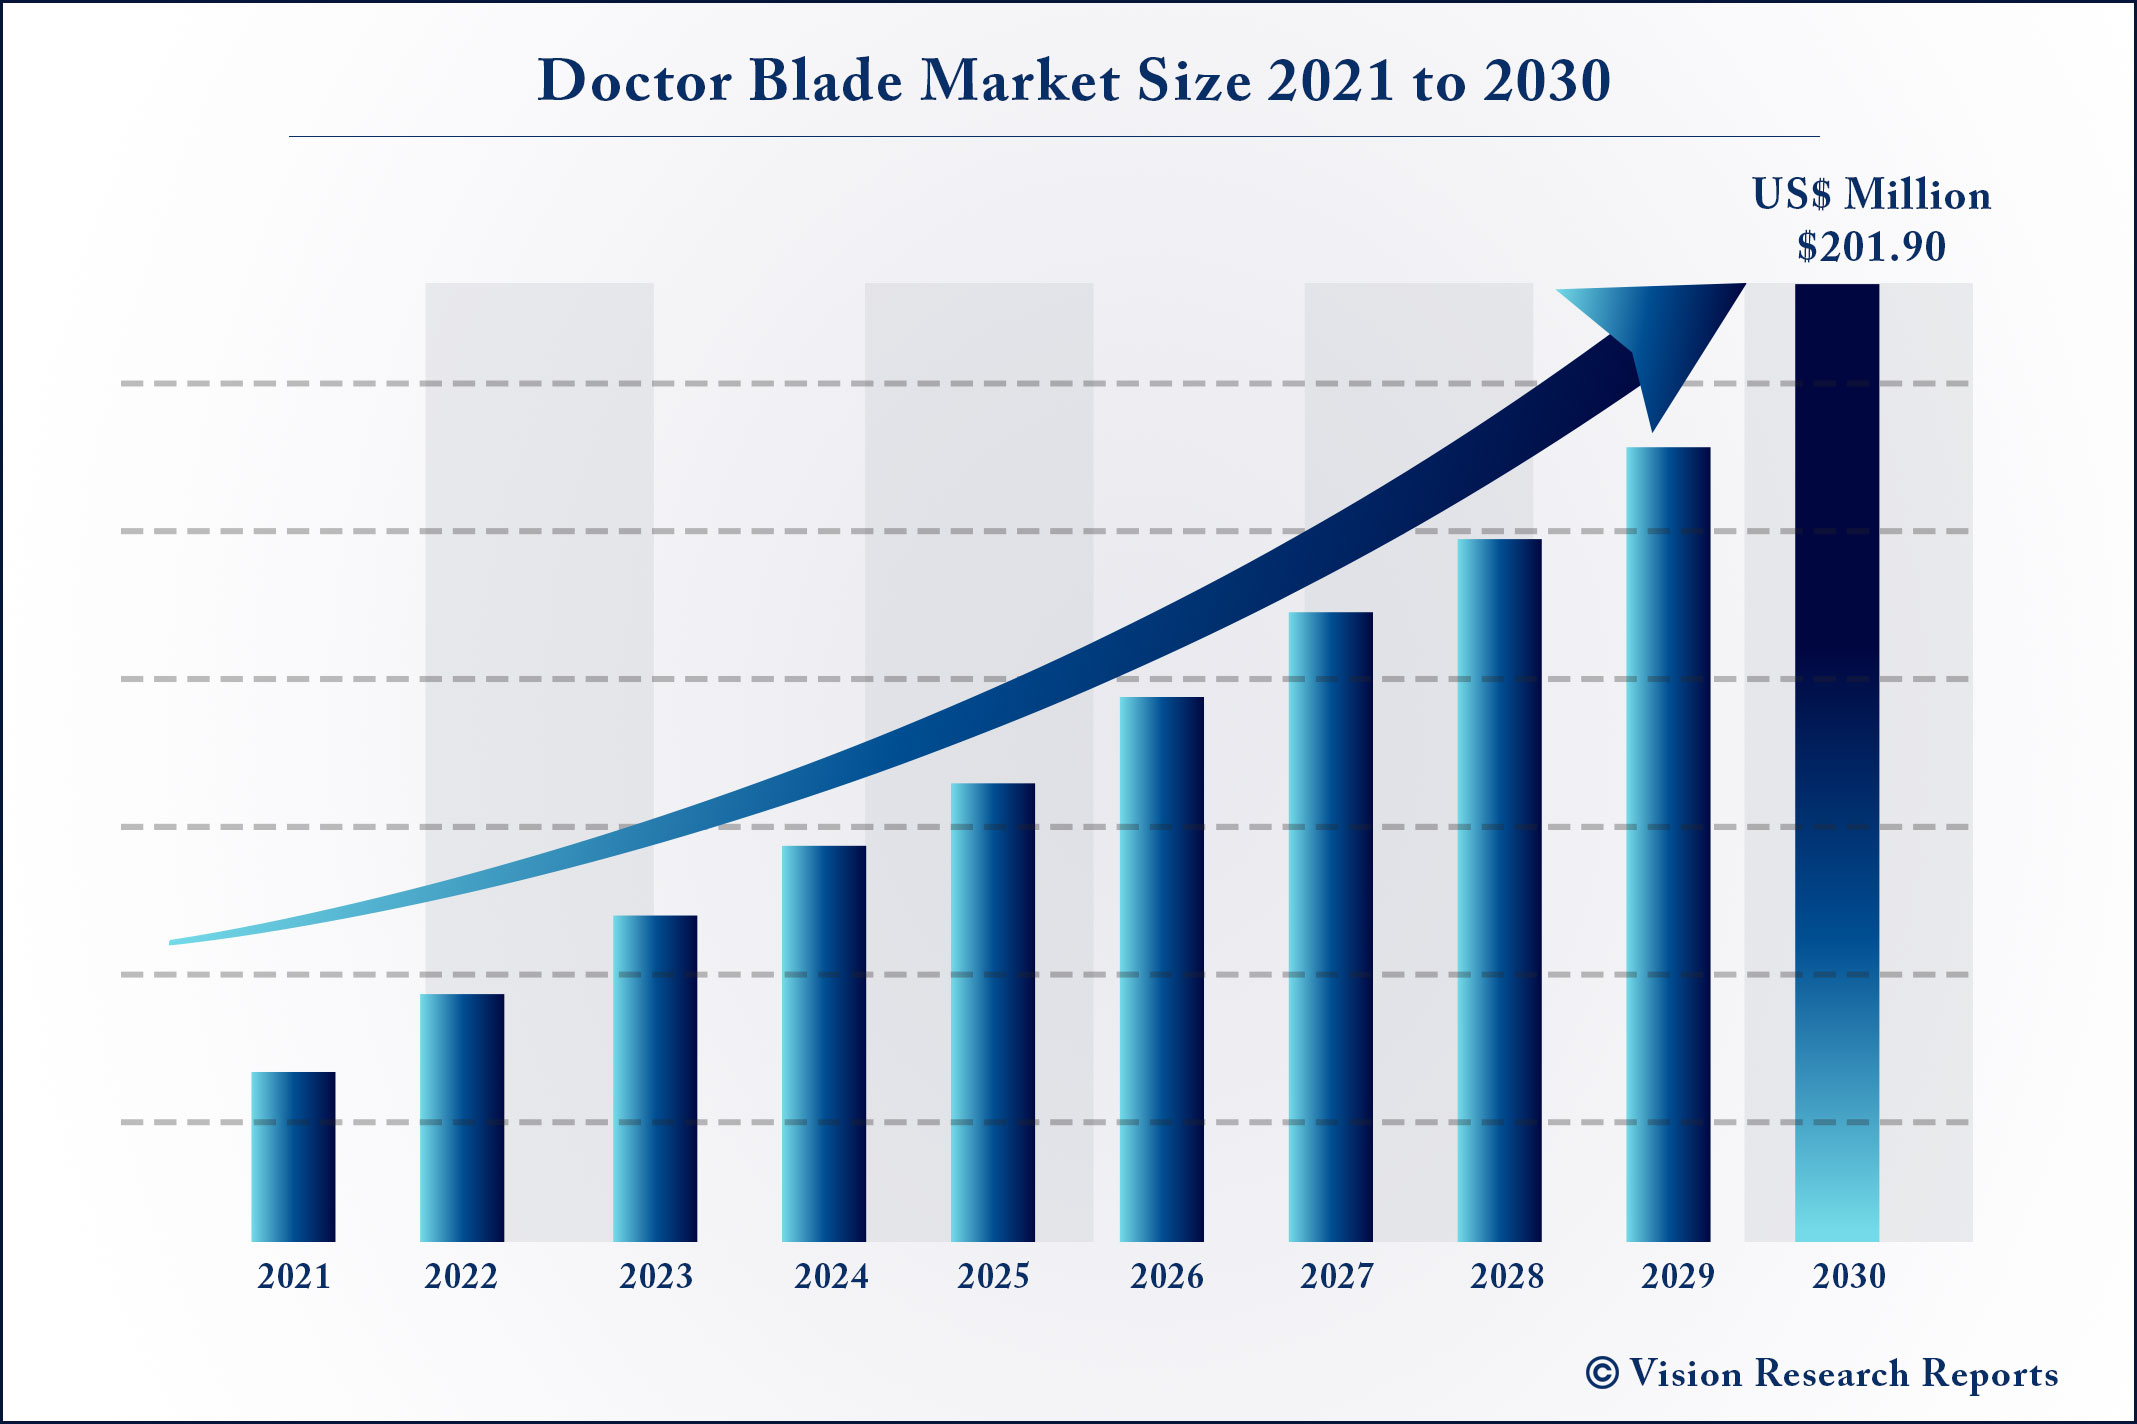 Doctor Blade Market Size 2021 to 2030